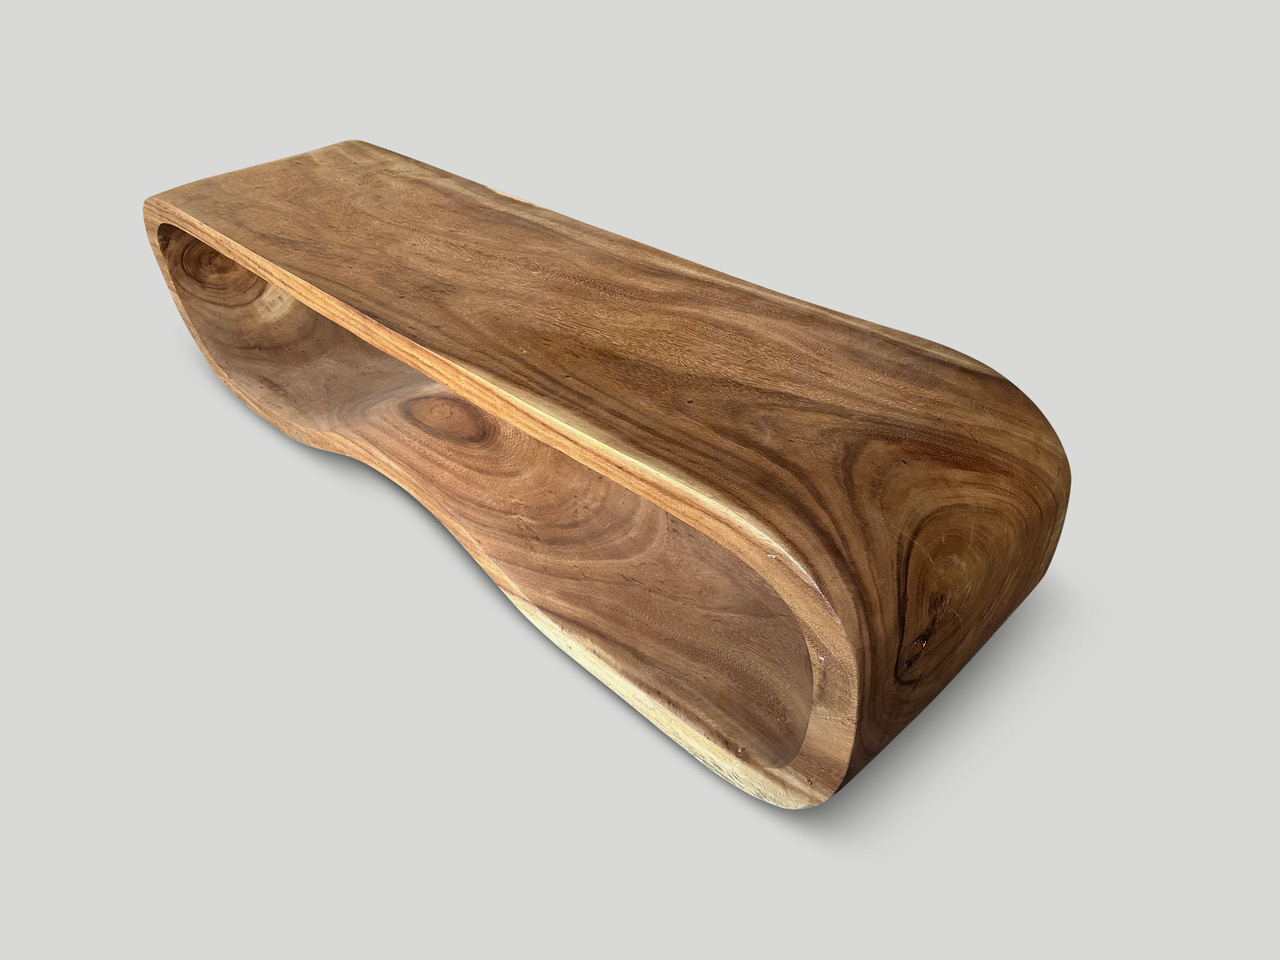 MINIMALIST SCULPTURAL BENCH OR COFFEE TABLE